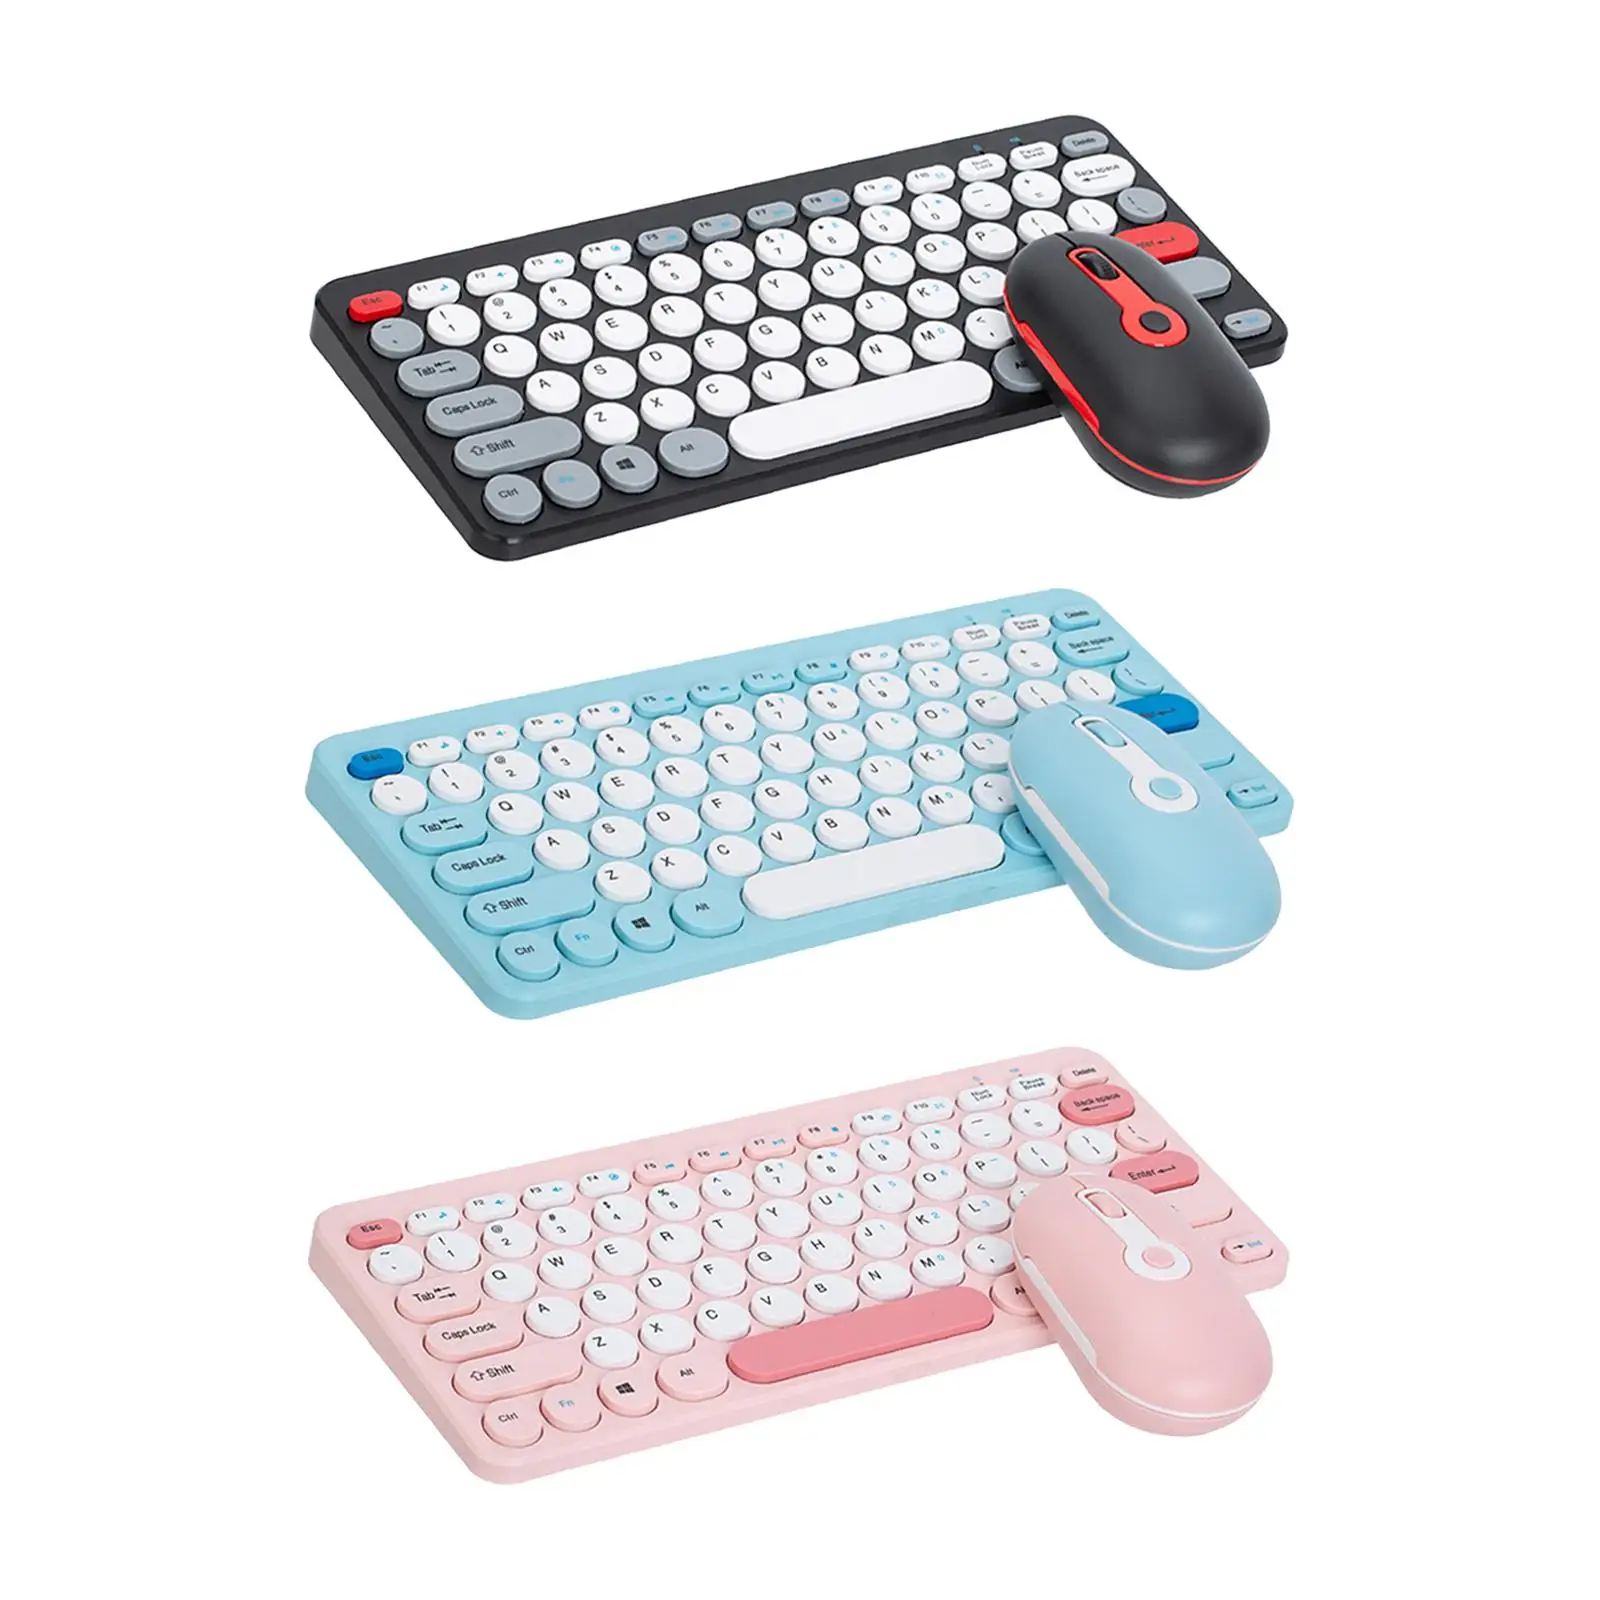 Wireless Computer Keyboard Mouse with USB Receiver Mini Body Cordless USB Keyboard and Mouse for Computer Tablet Desktop PC